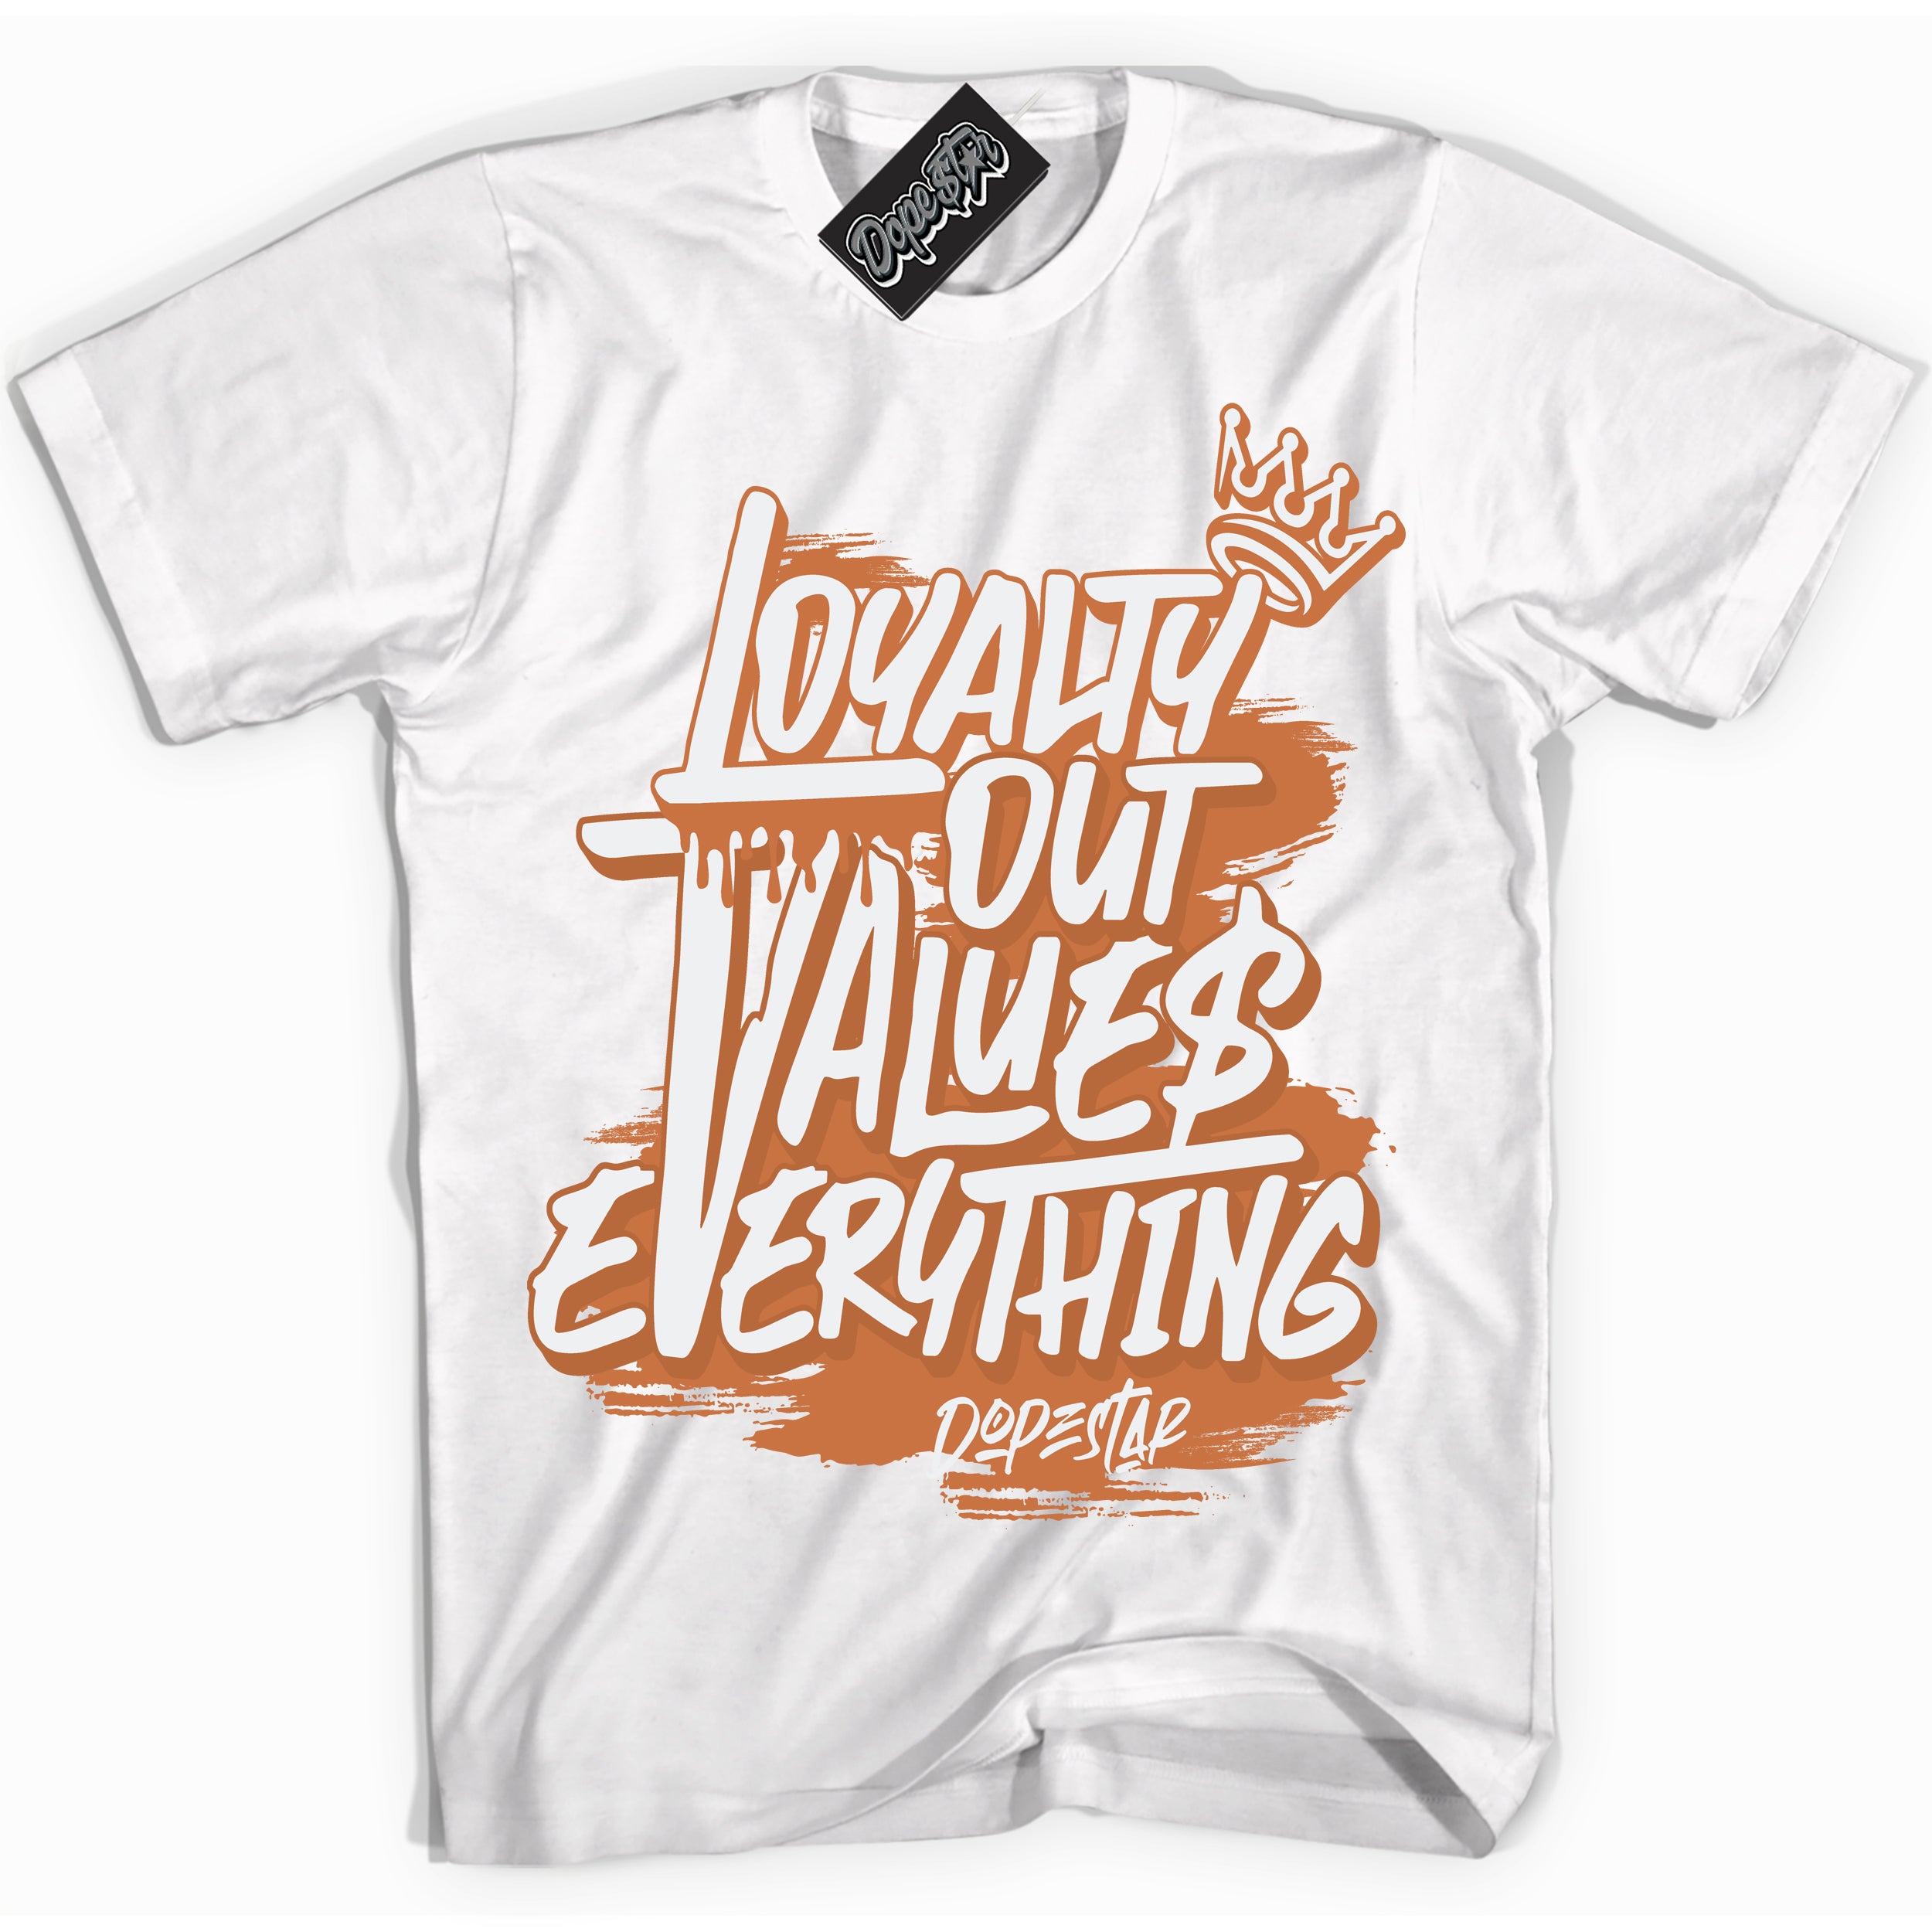 Cool White Shirt with “ Loyalty Out Values Everything” design that perfectly matches Monarch Sneakers.